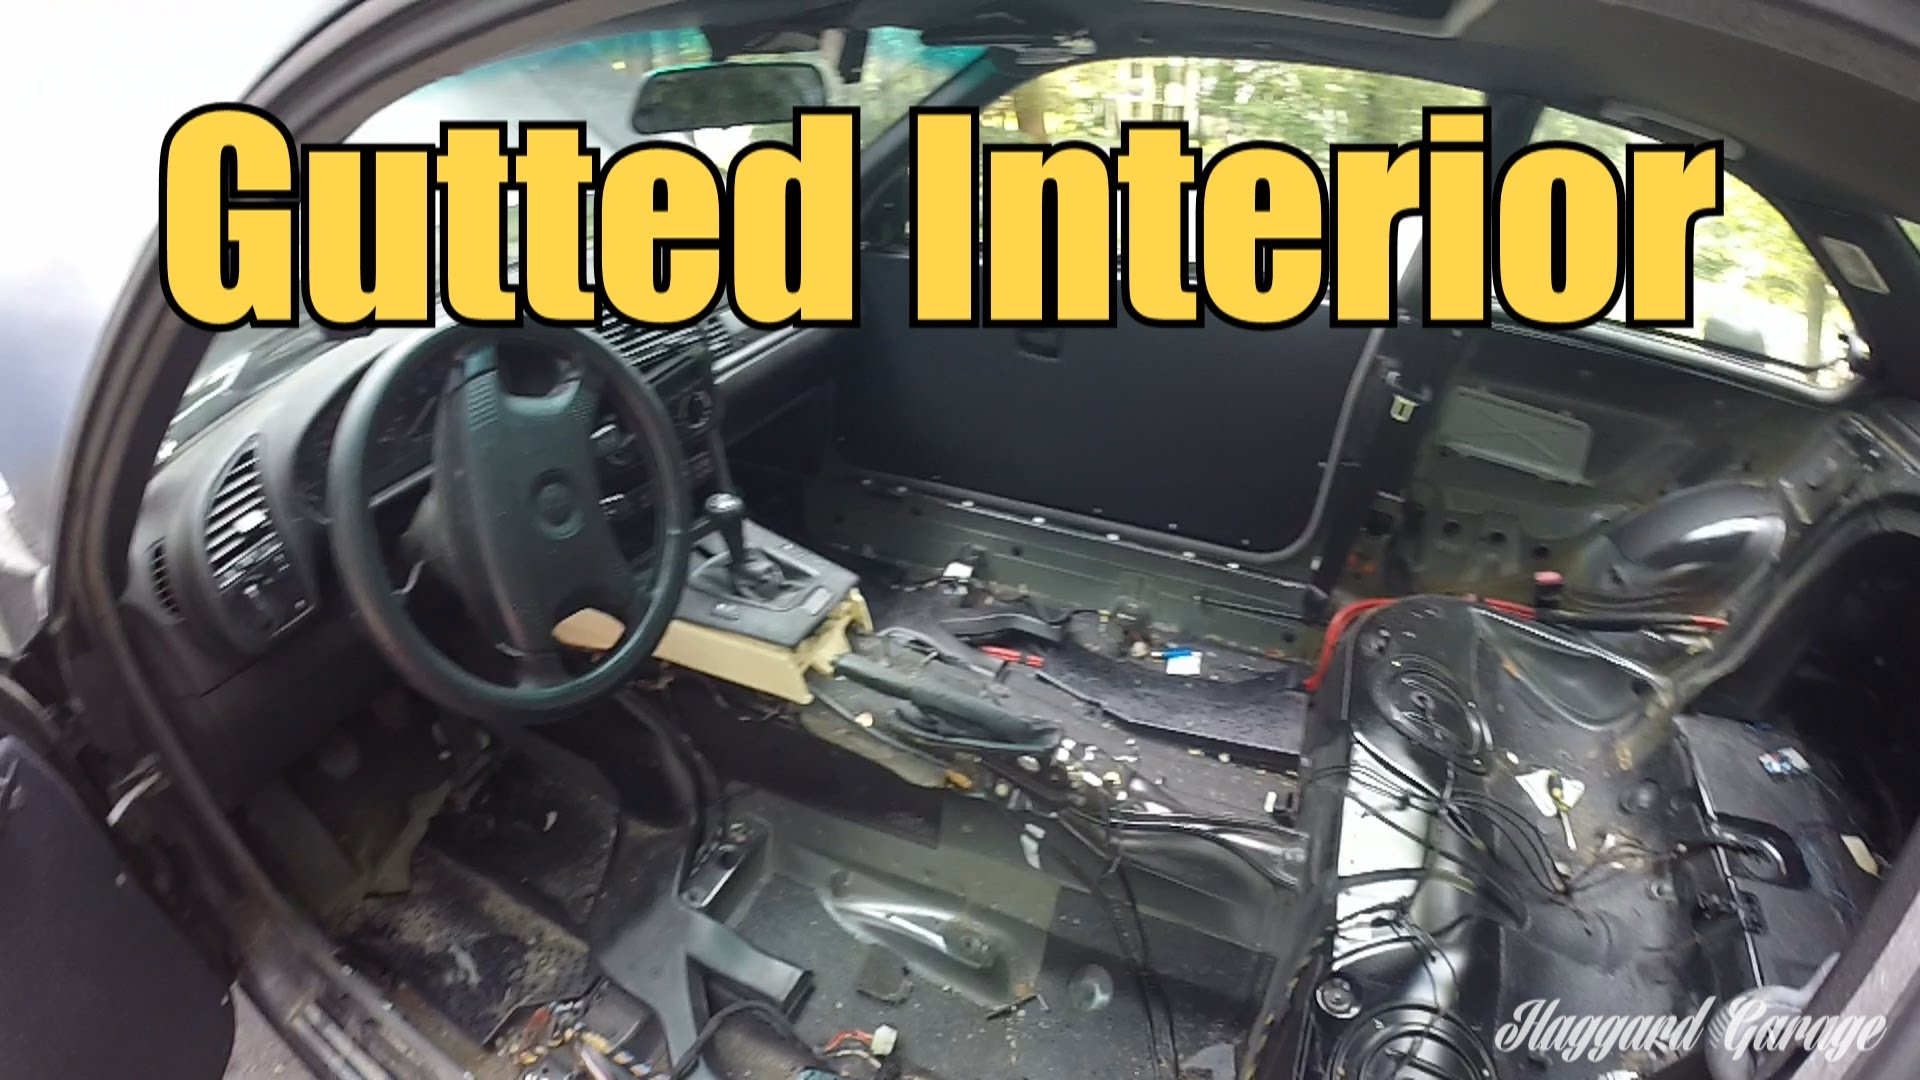 E36 Gutted Driftcar Interior - YouTube